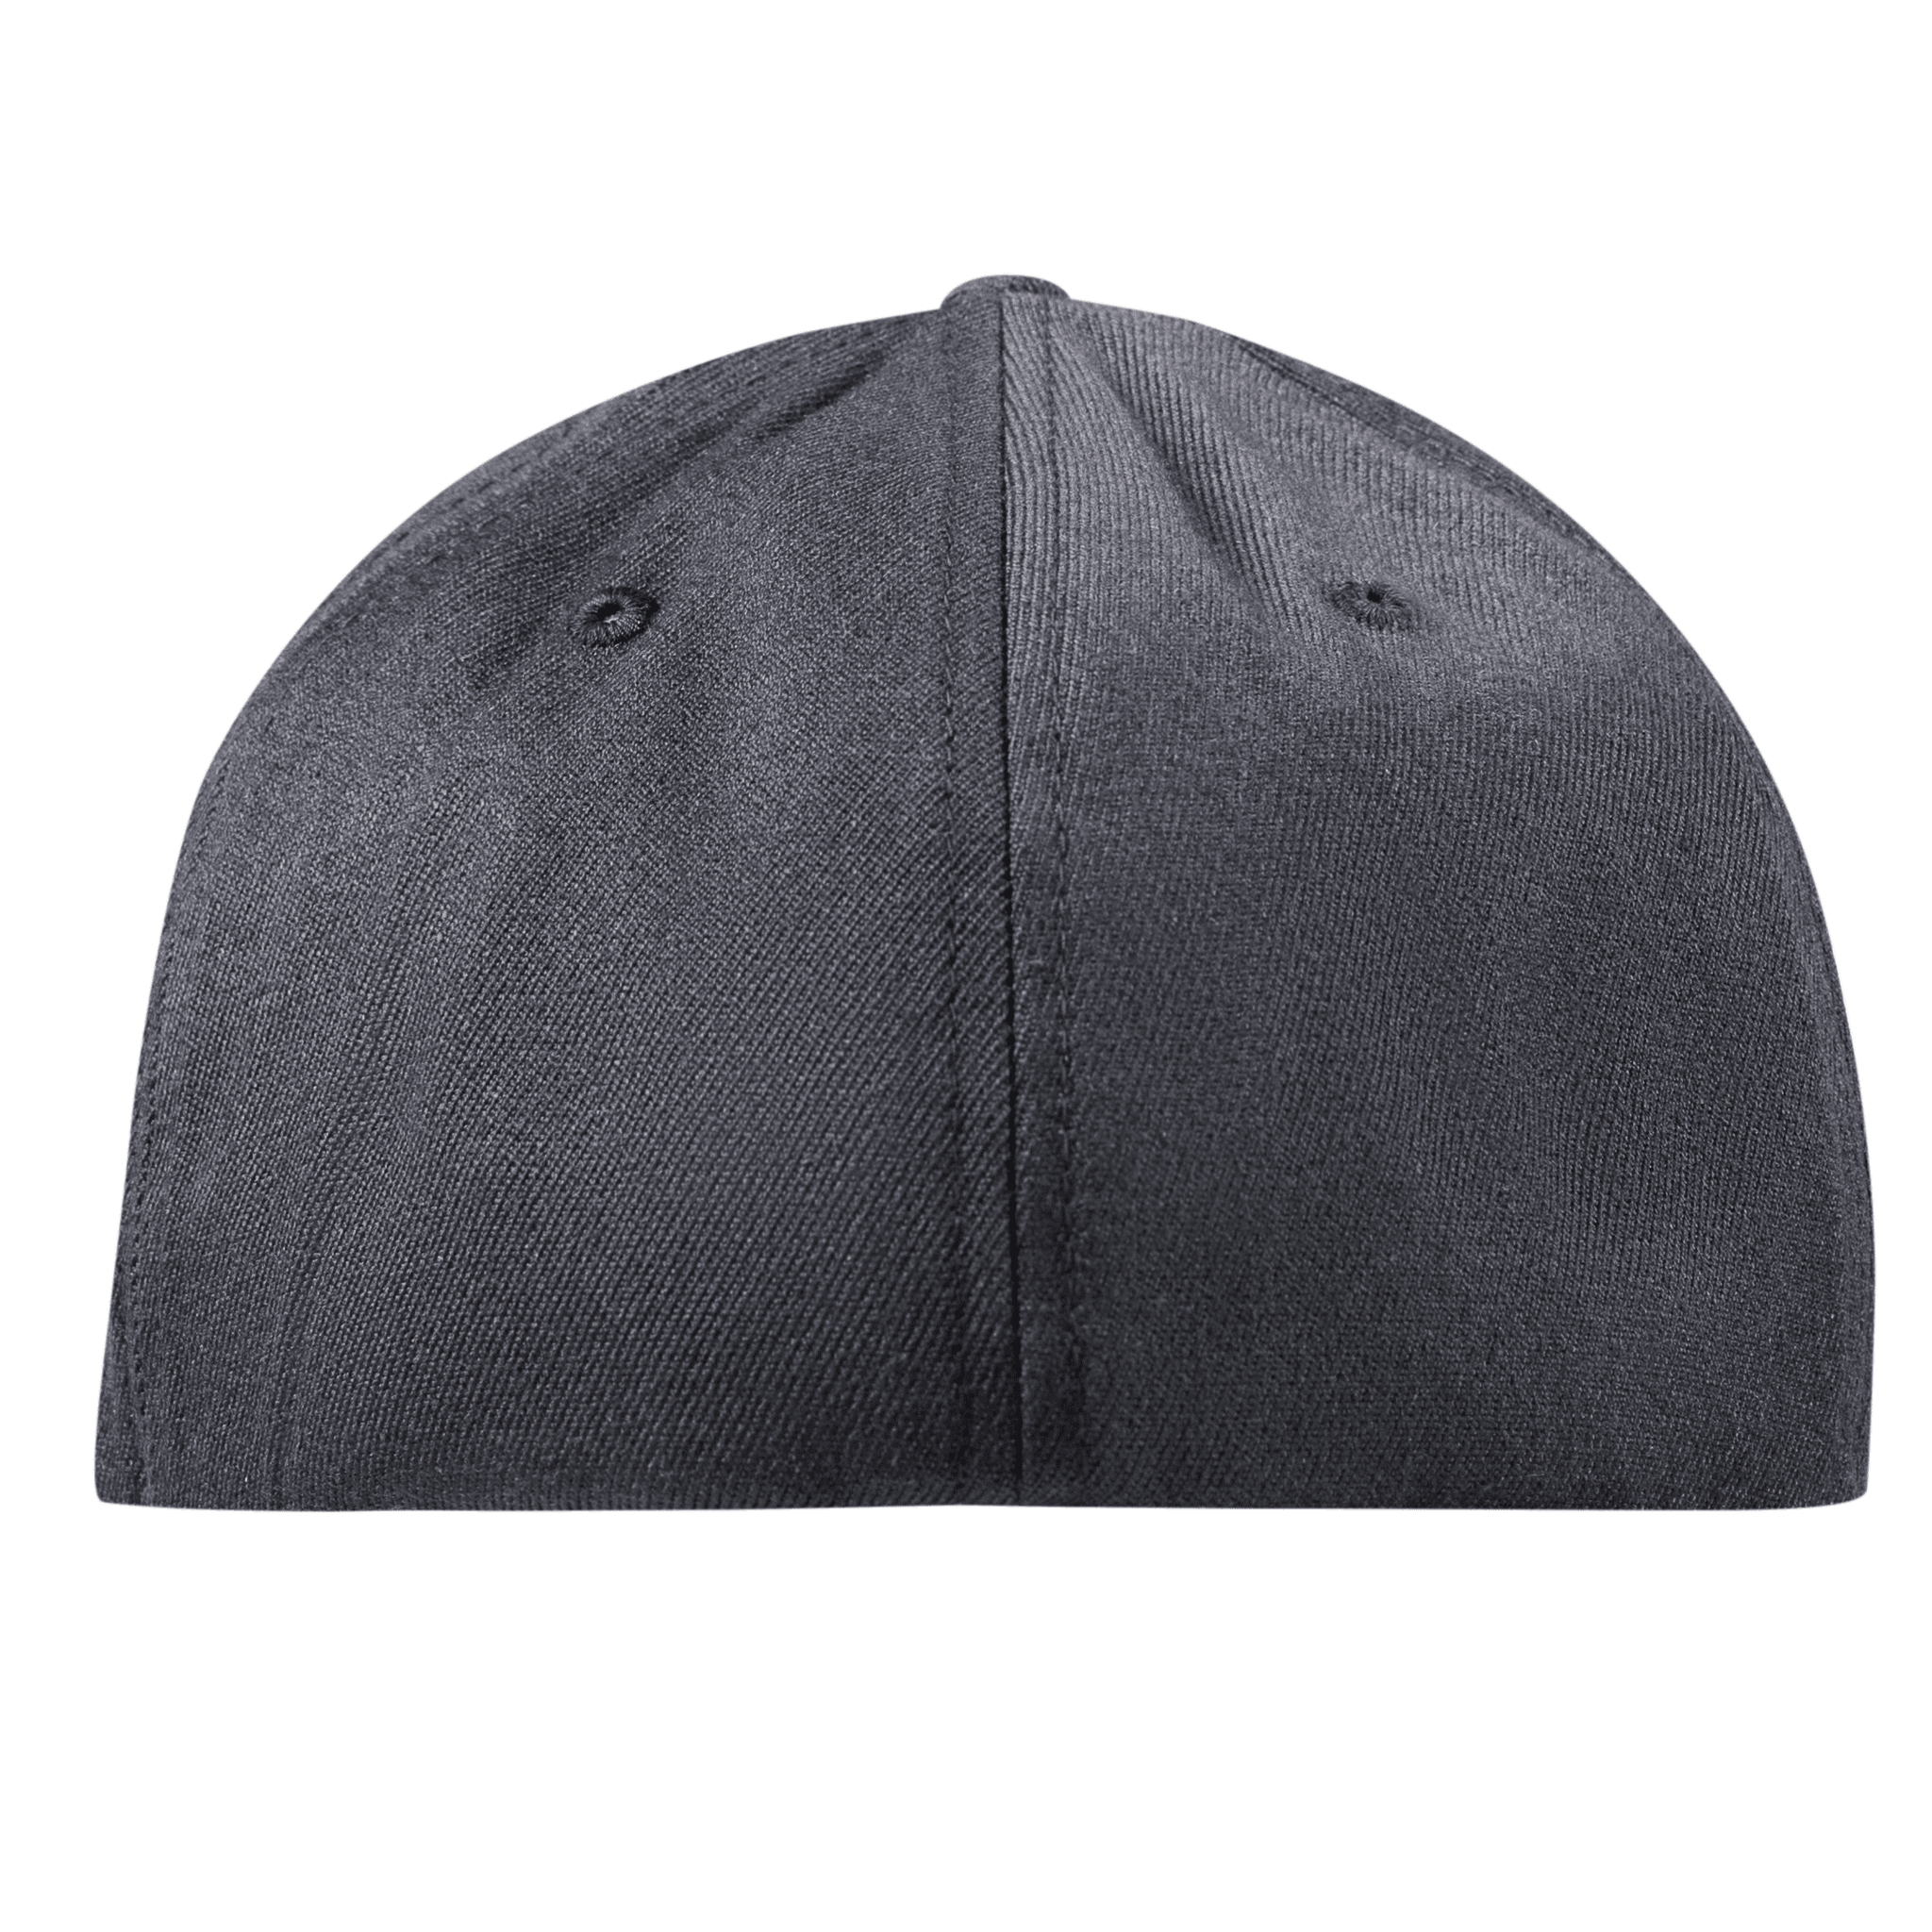 Oklahoma 46 Flexfit Fitted Back Charcoal